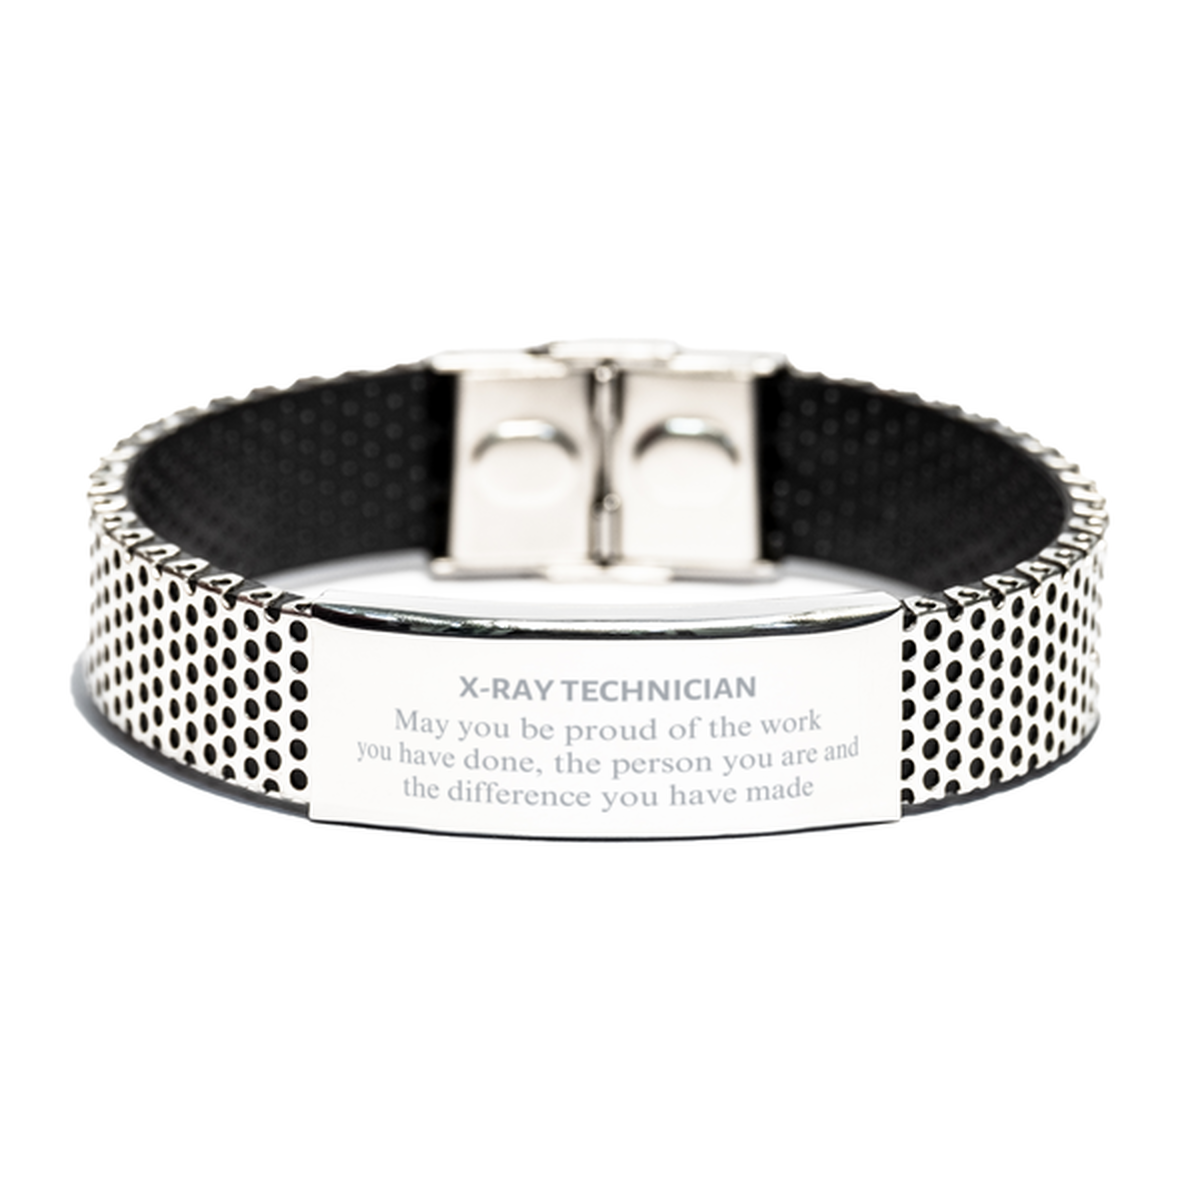 X-Ray Technician May you be proud of the work you have done, Retirement X-Ray Technician Stainless Steel Bracelet for Colleague Appreciation Gifts Amazing for X-Ray Technician